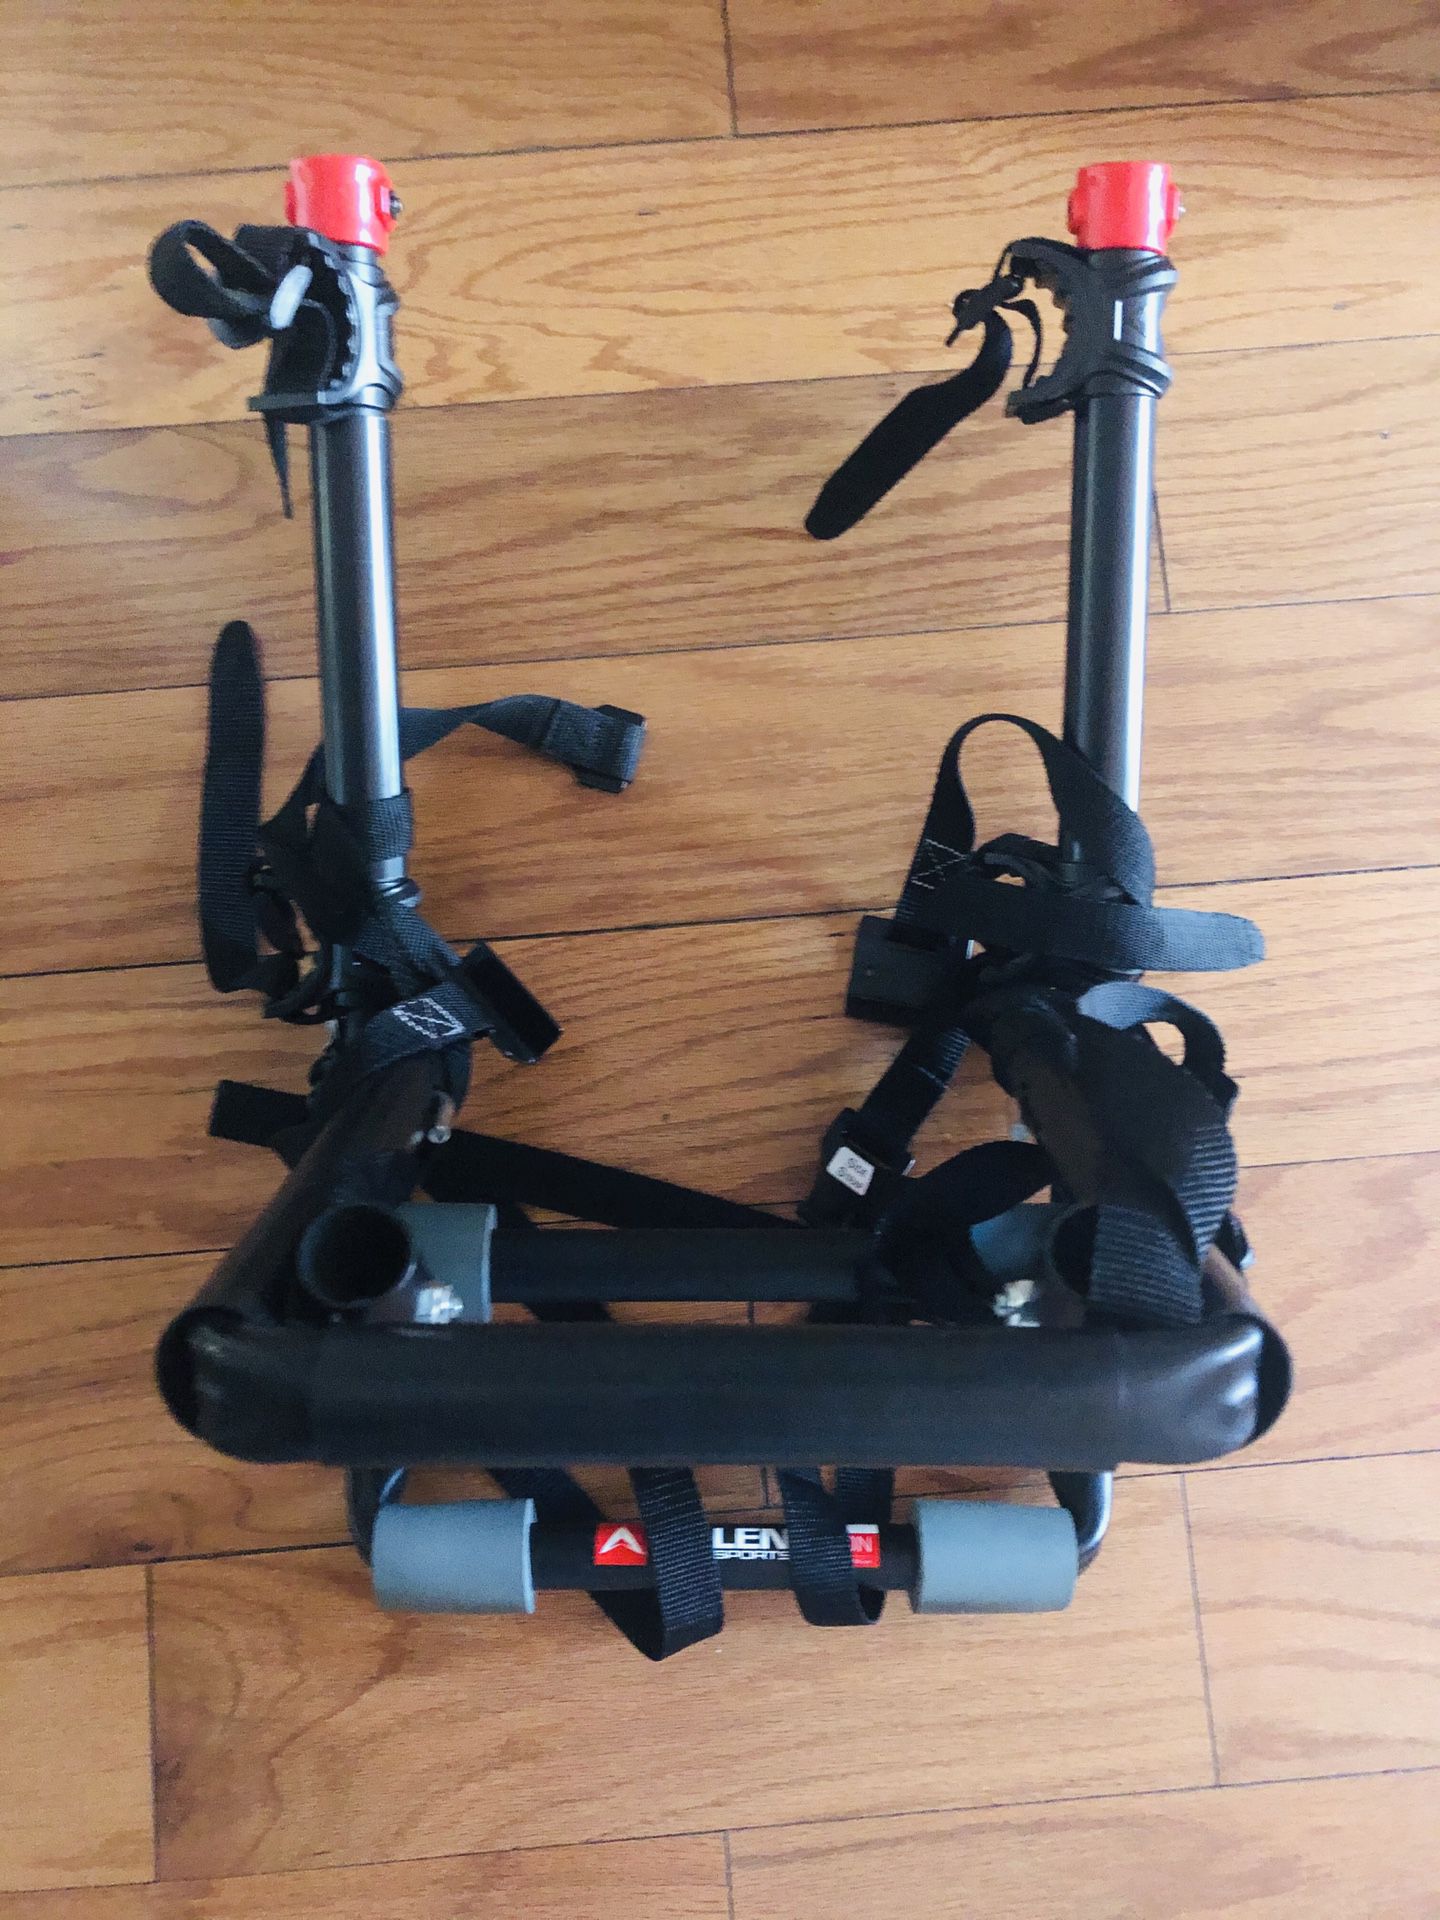 Allen Sports Model 102DN Bike Rack in excellent condition like new (pick up only)no hold first come first serve price firm